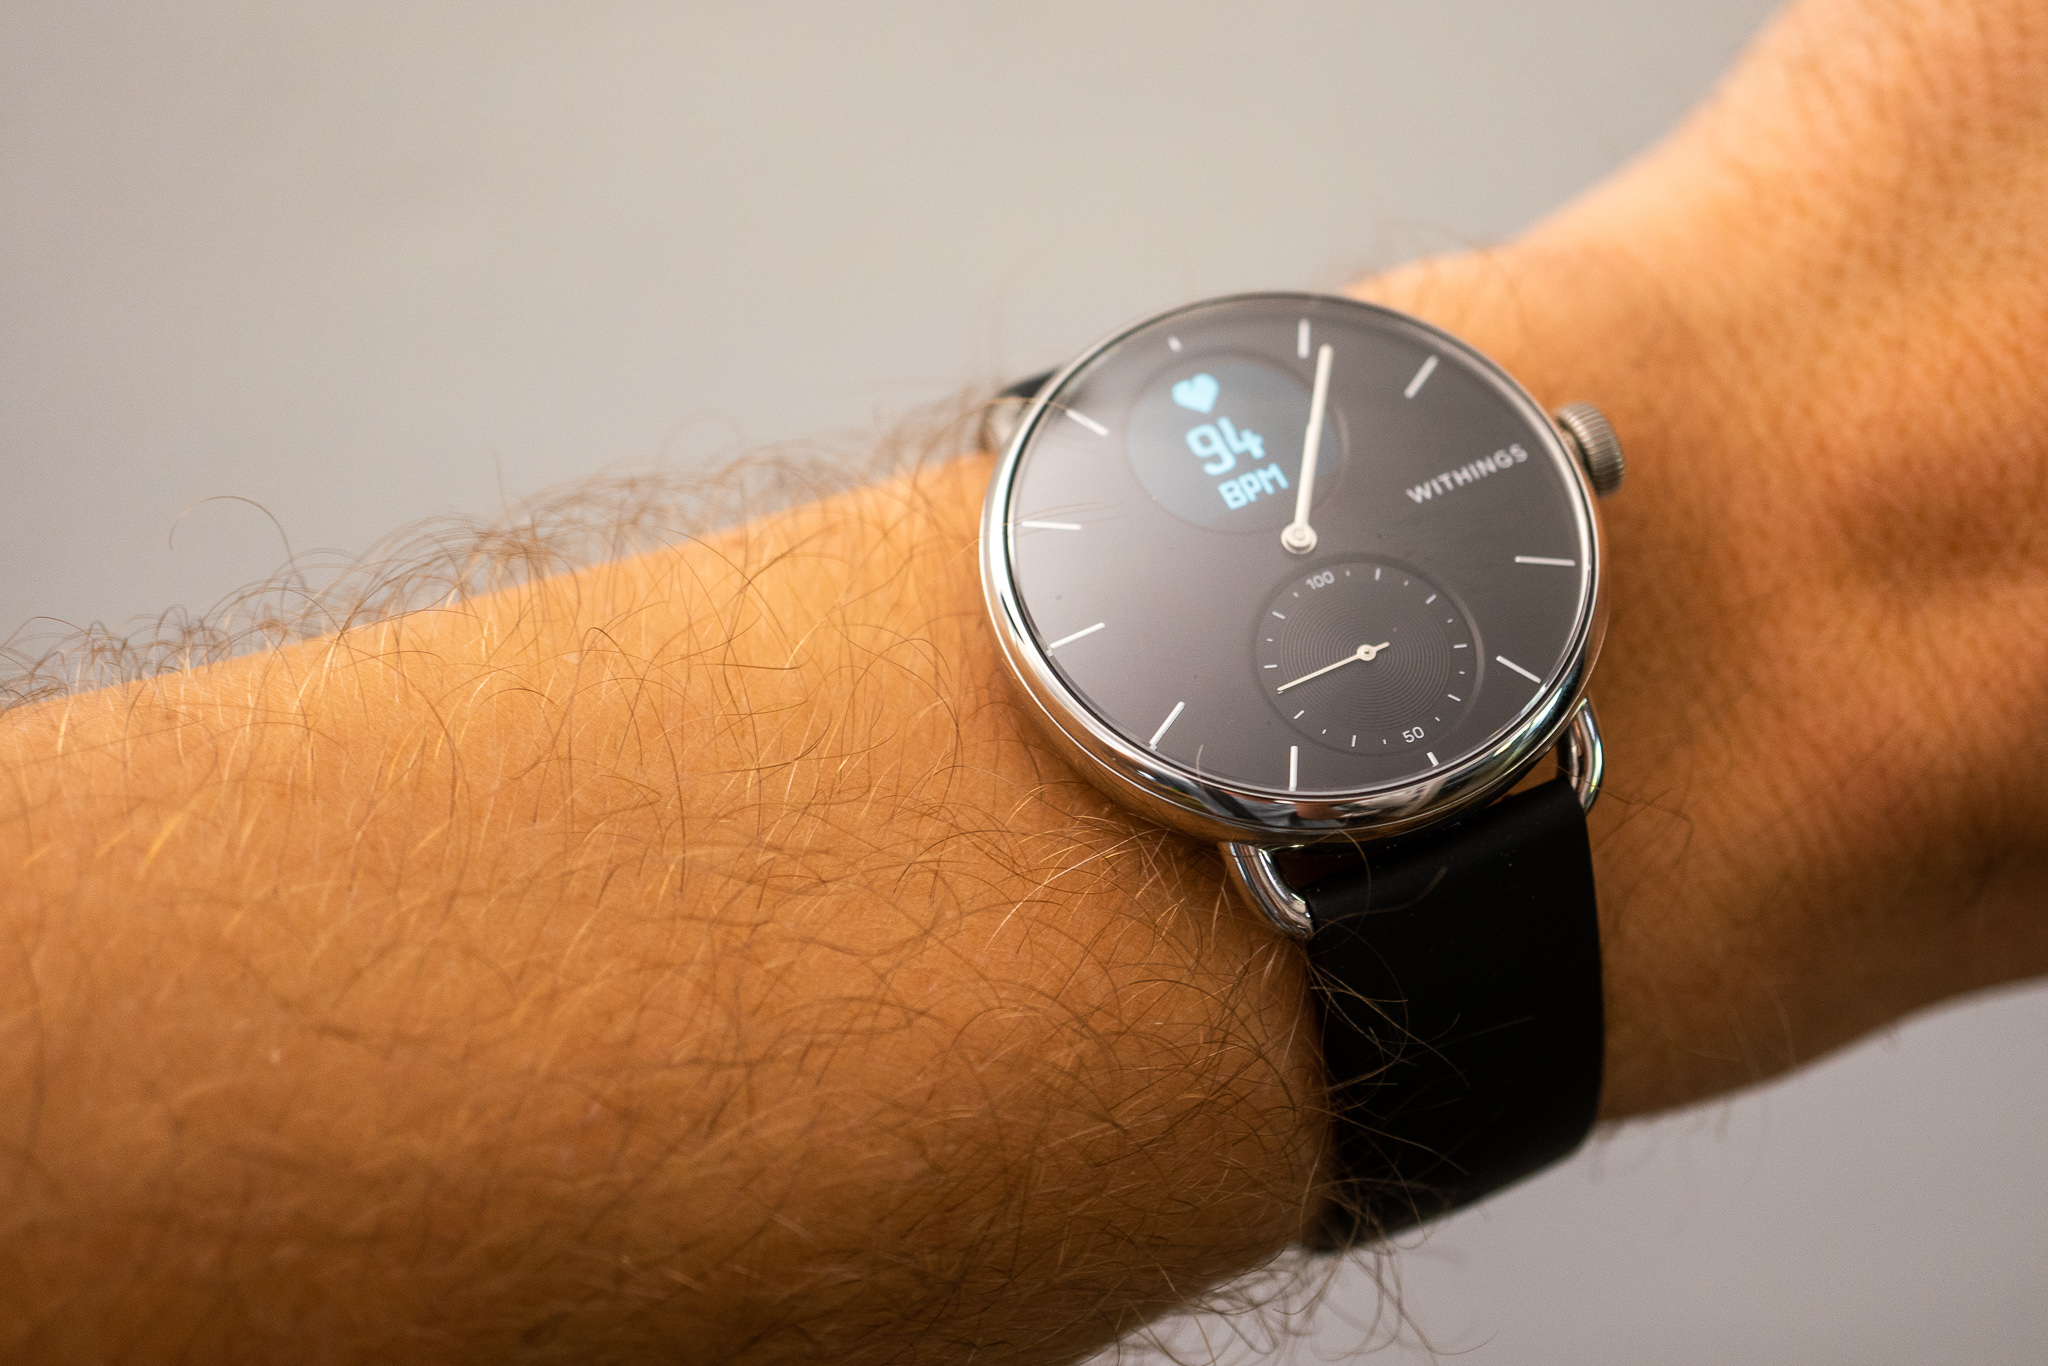 Withings ScanWatch is a great alternative to other smartwatches